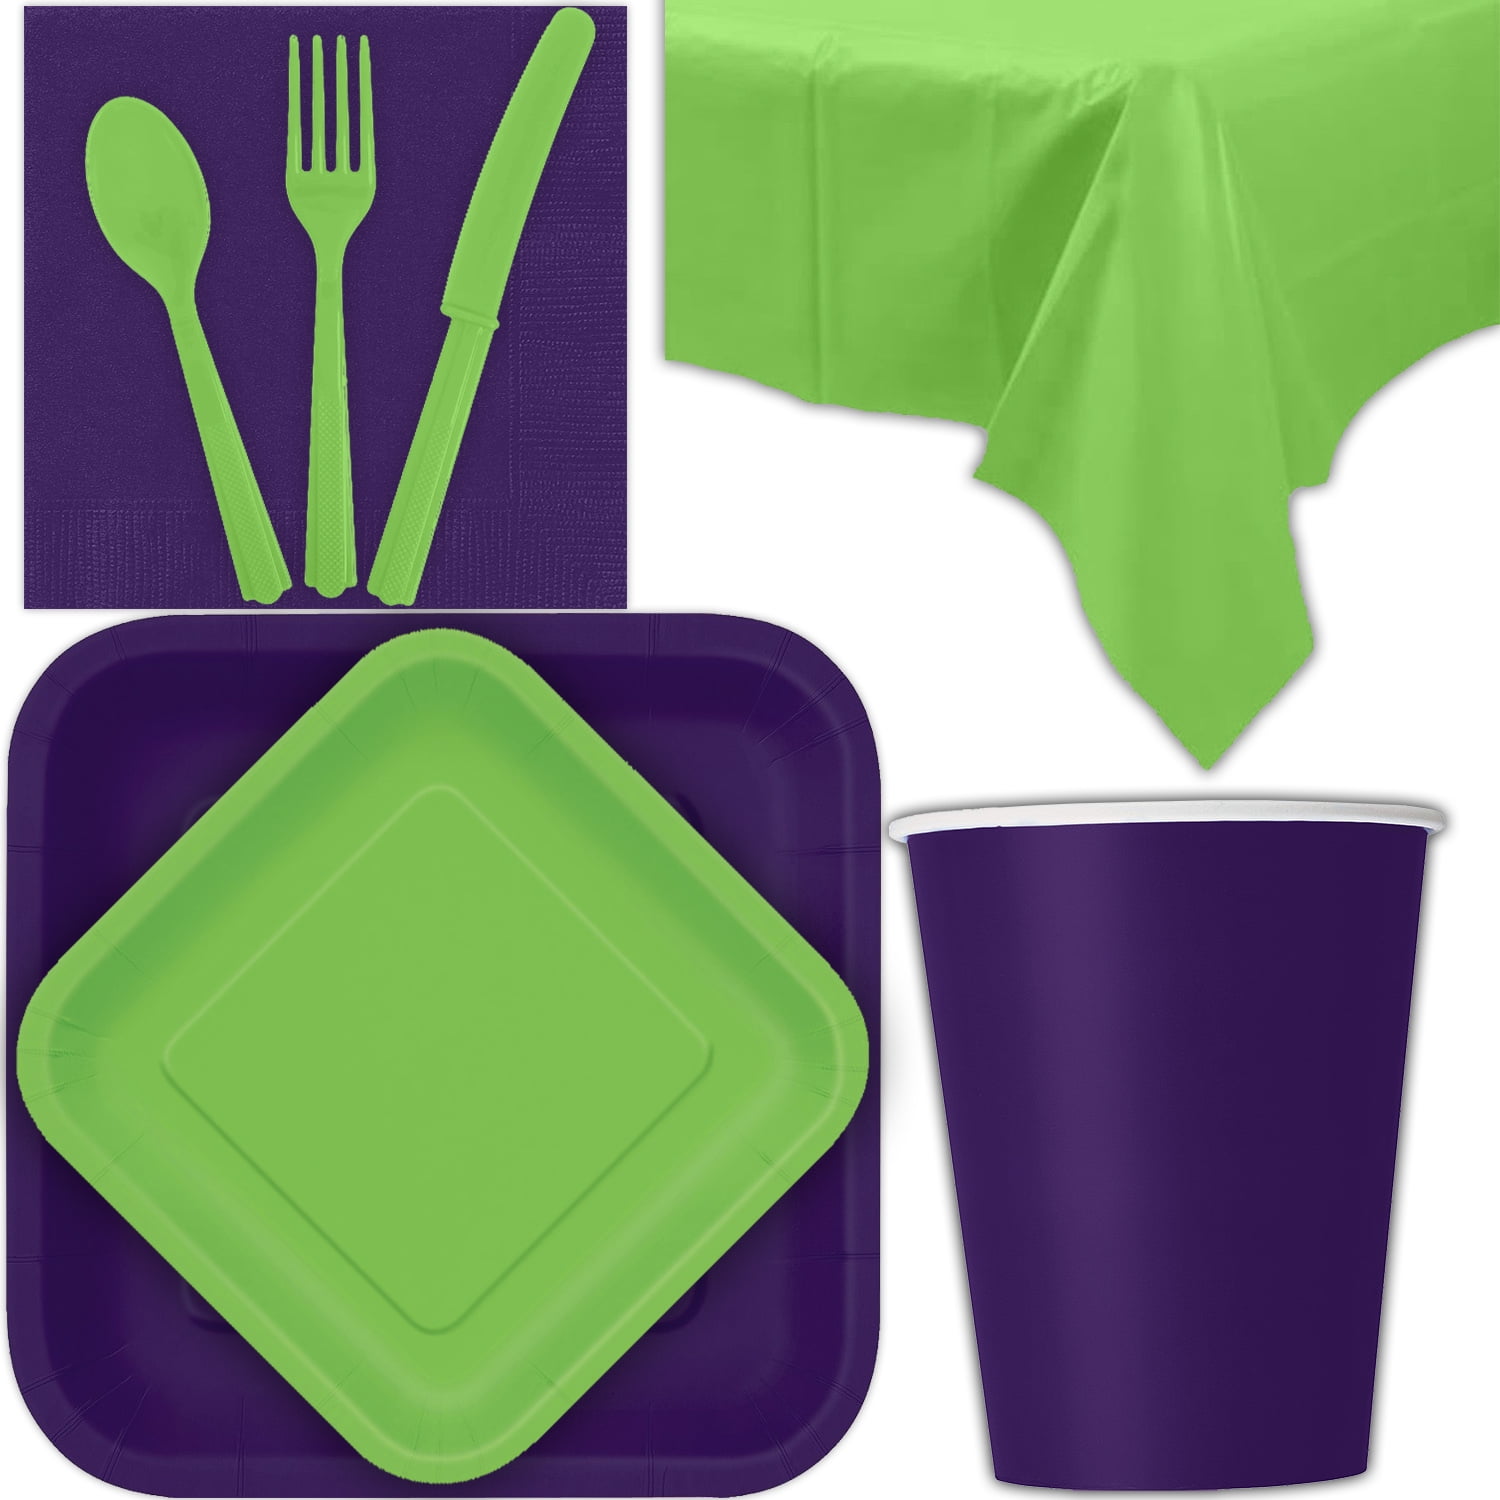 PURPLE PREMIUM QUALITY PLASTIC LUNCH PLATES PACK OF 25 B'DAY PARTY SUPPLIES 